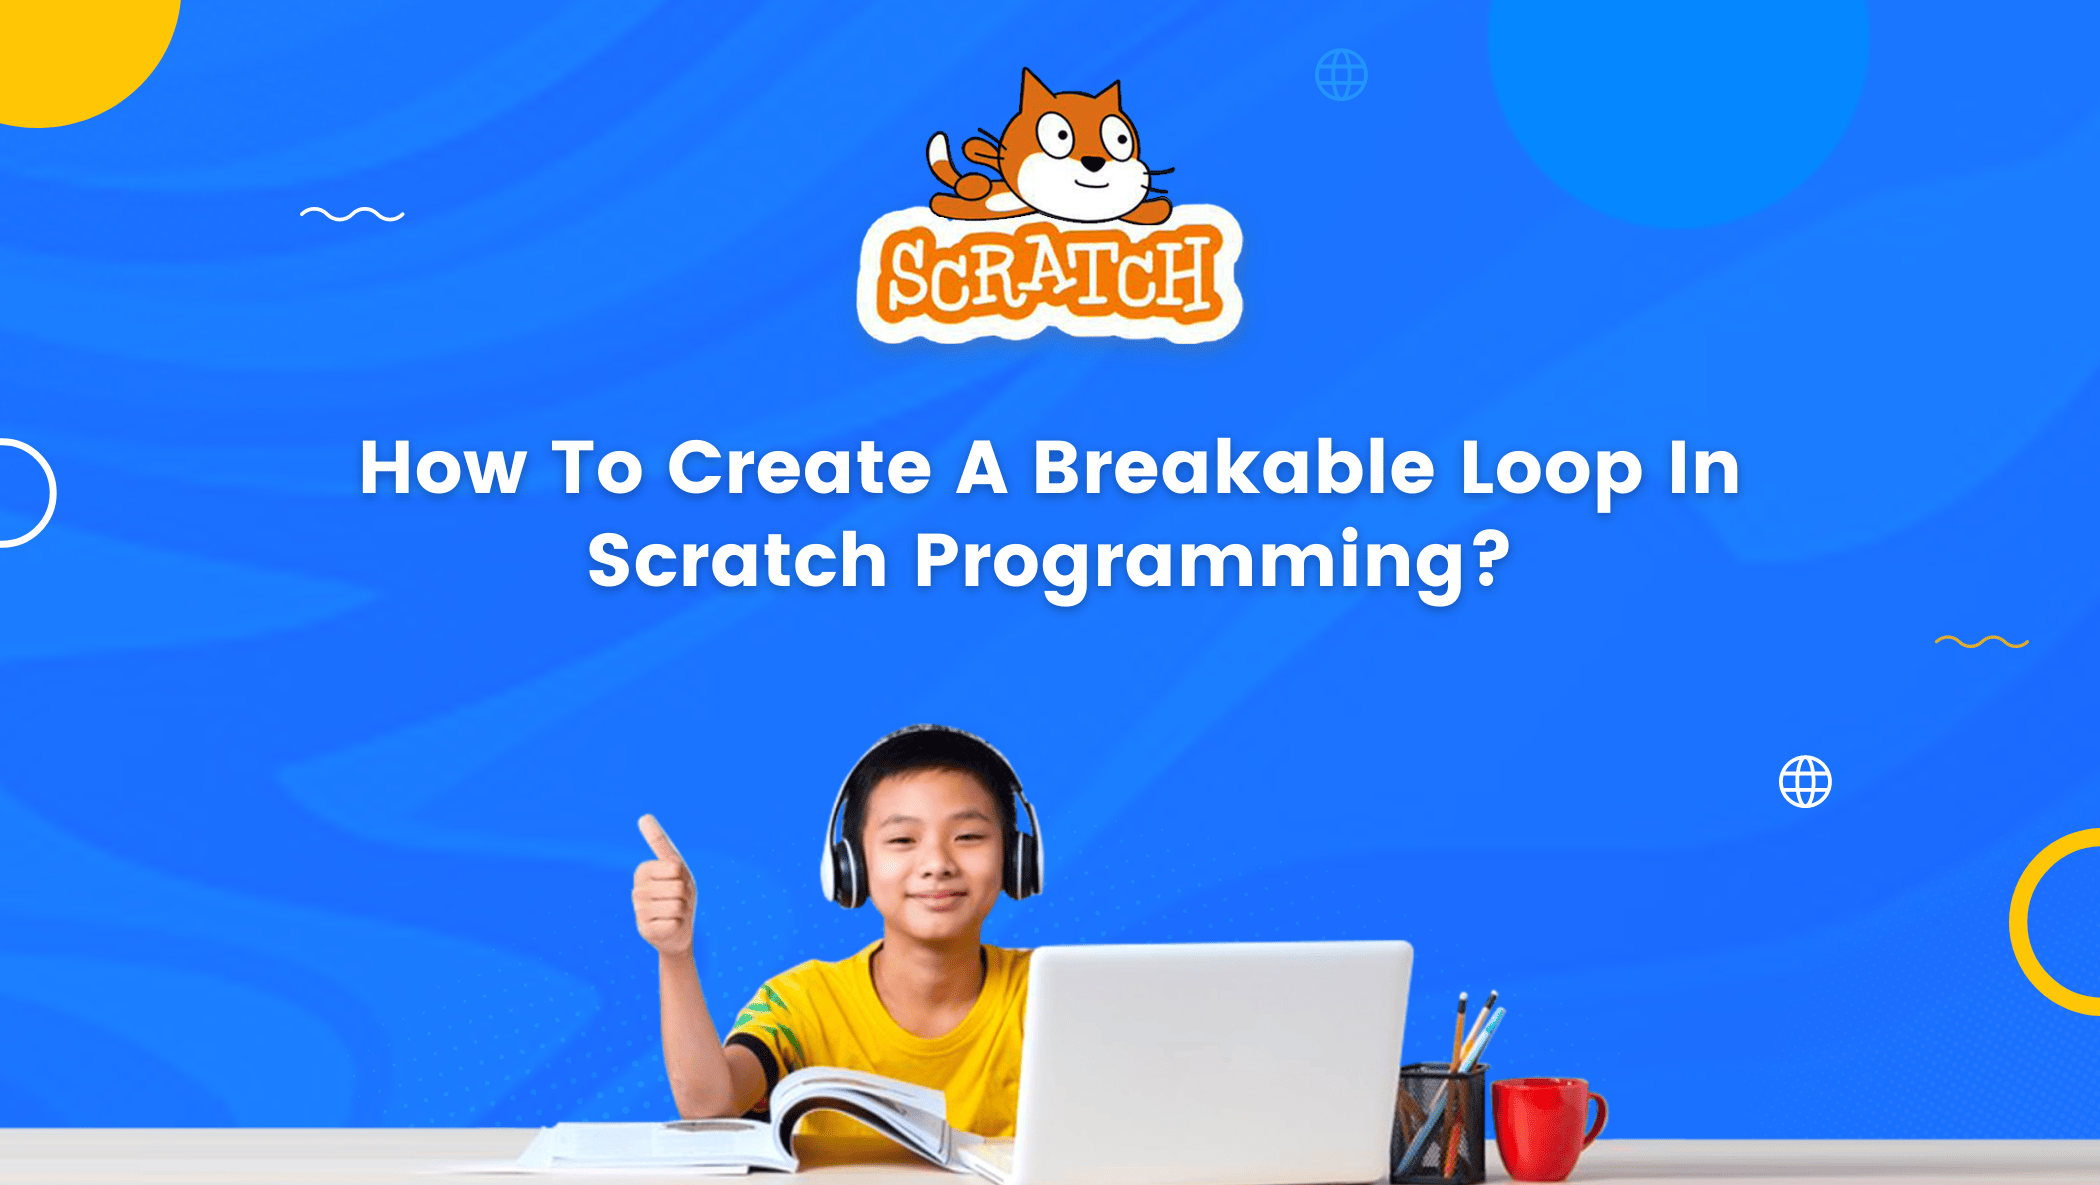 How To Create A Breakable Loop In Scratch Programming